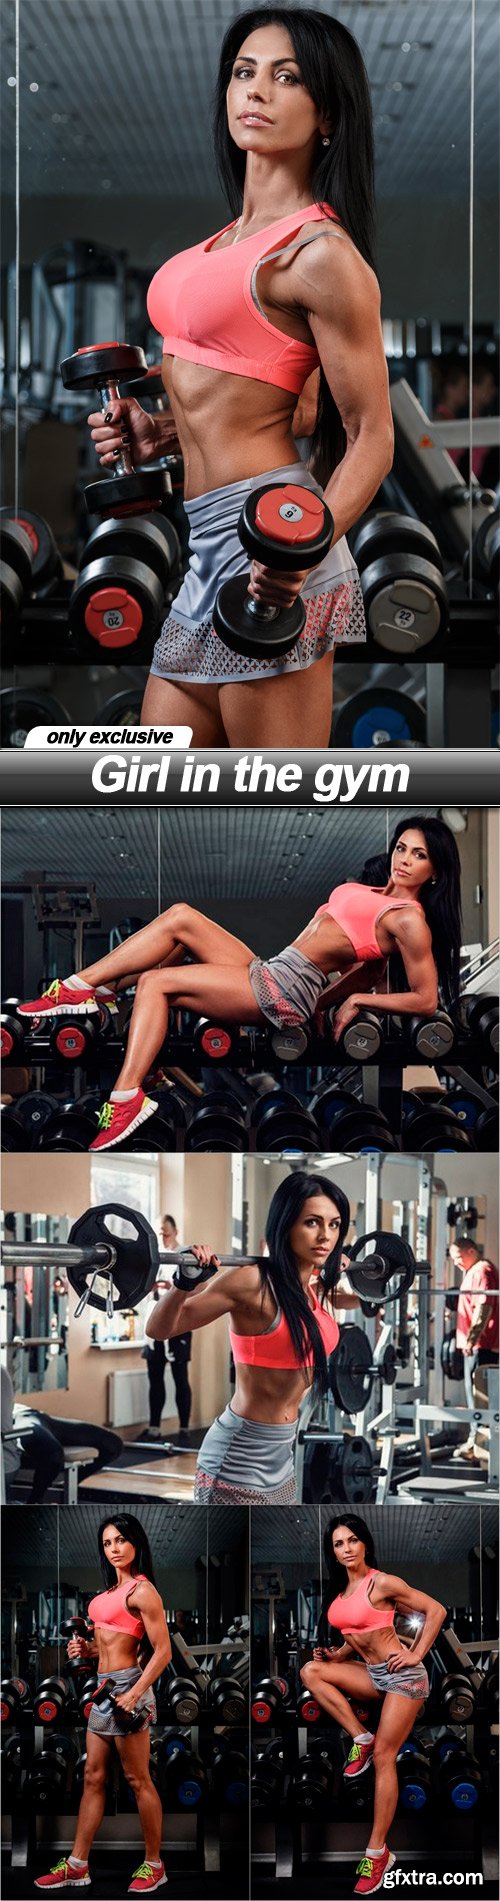 Girl in the gym - 5 UHQ JPEG